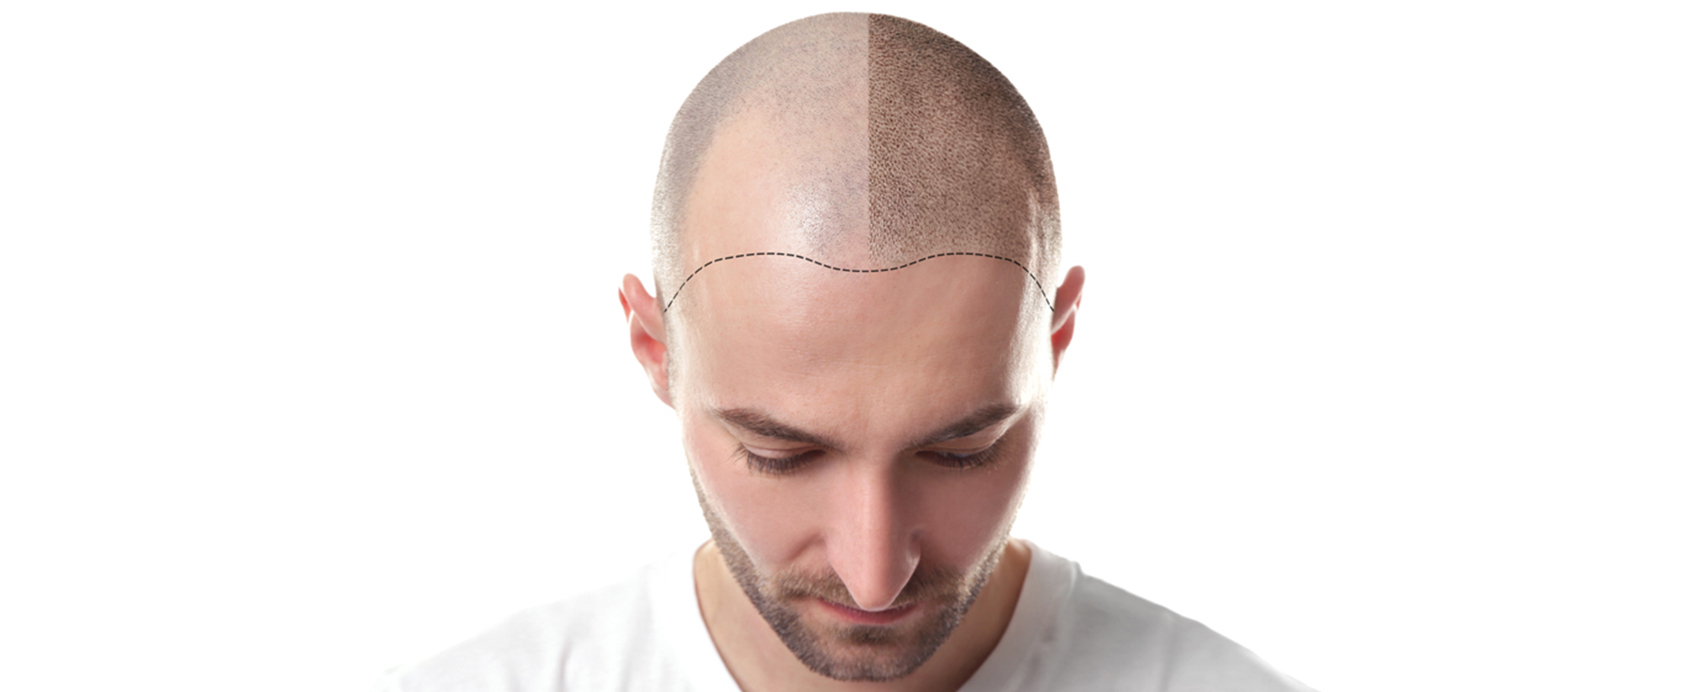 You are currently viewing Guide on Hair Transplantation by Aliva Aesthetics